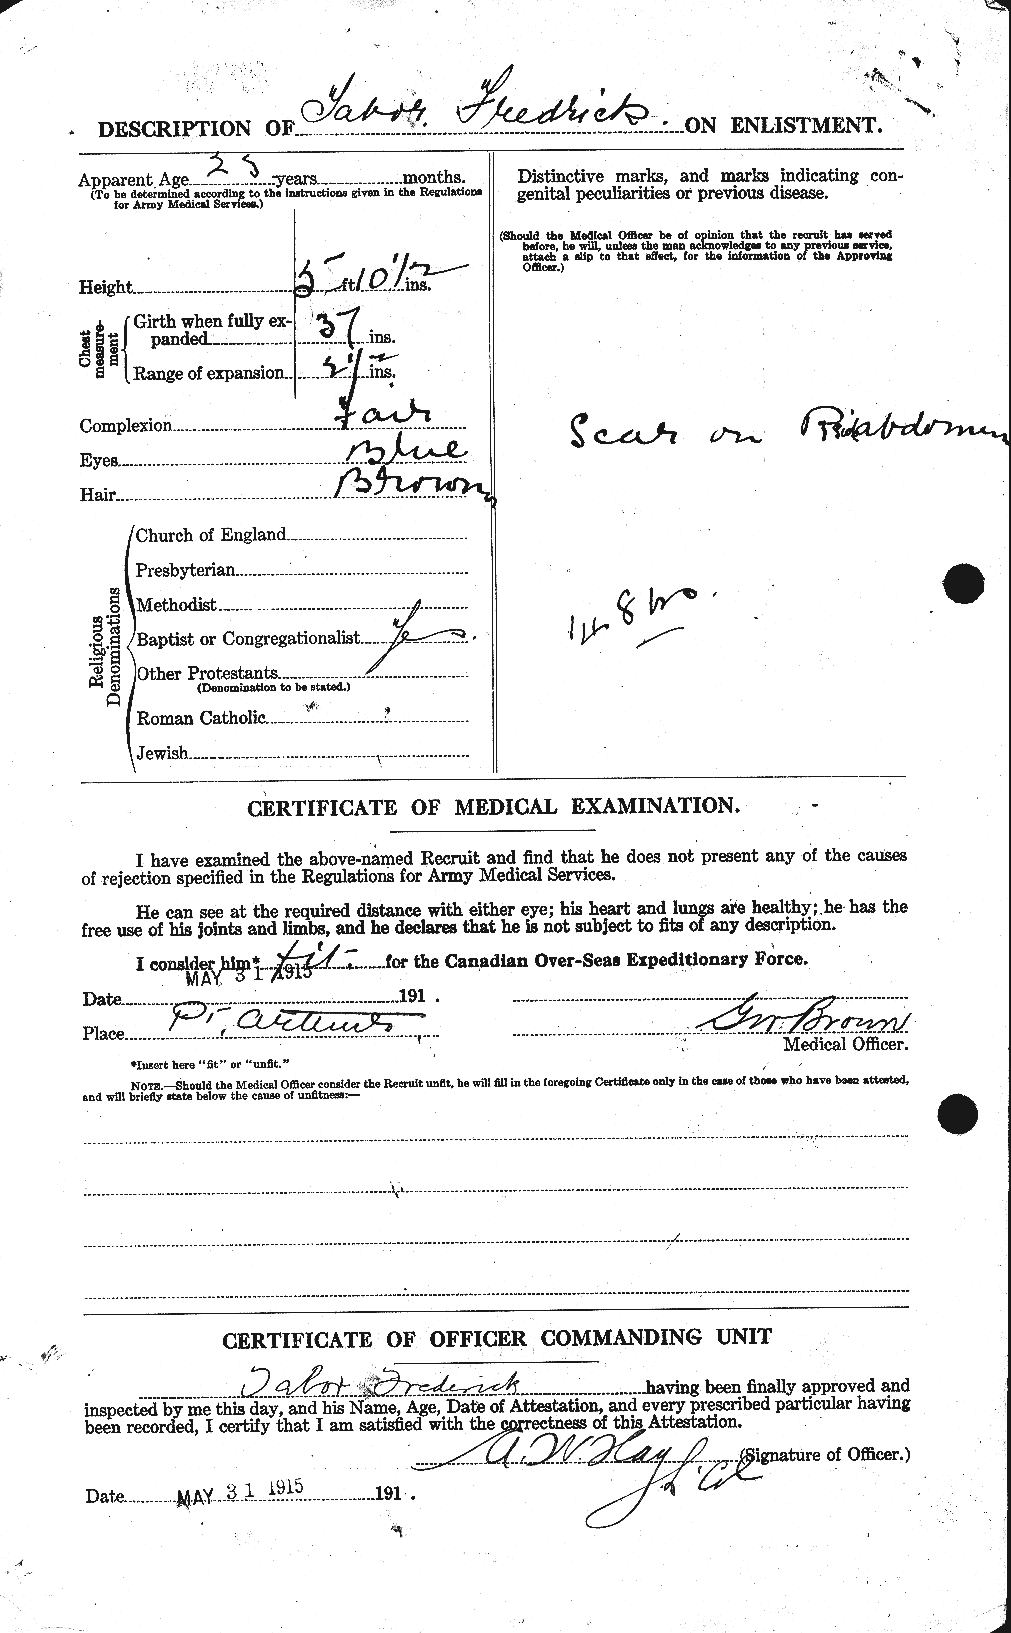 Personnel Records of the First World War - CEF 127987b